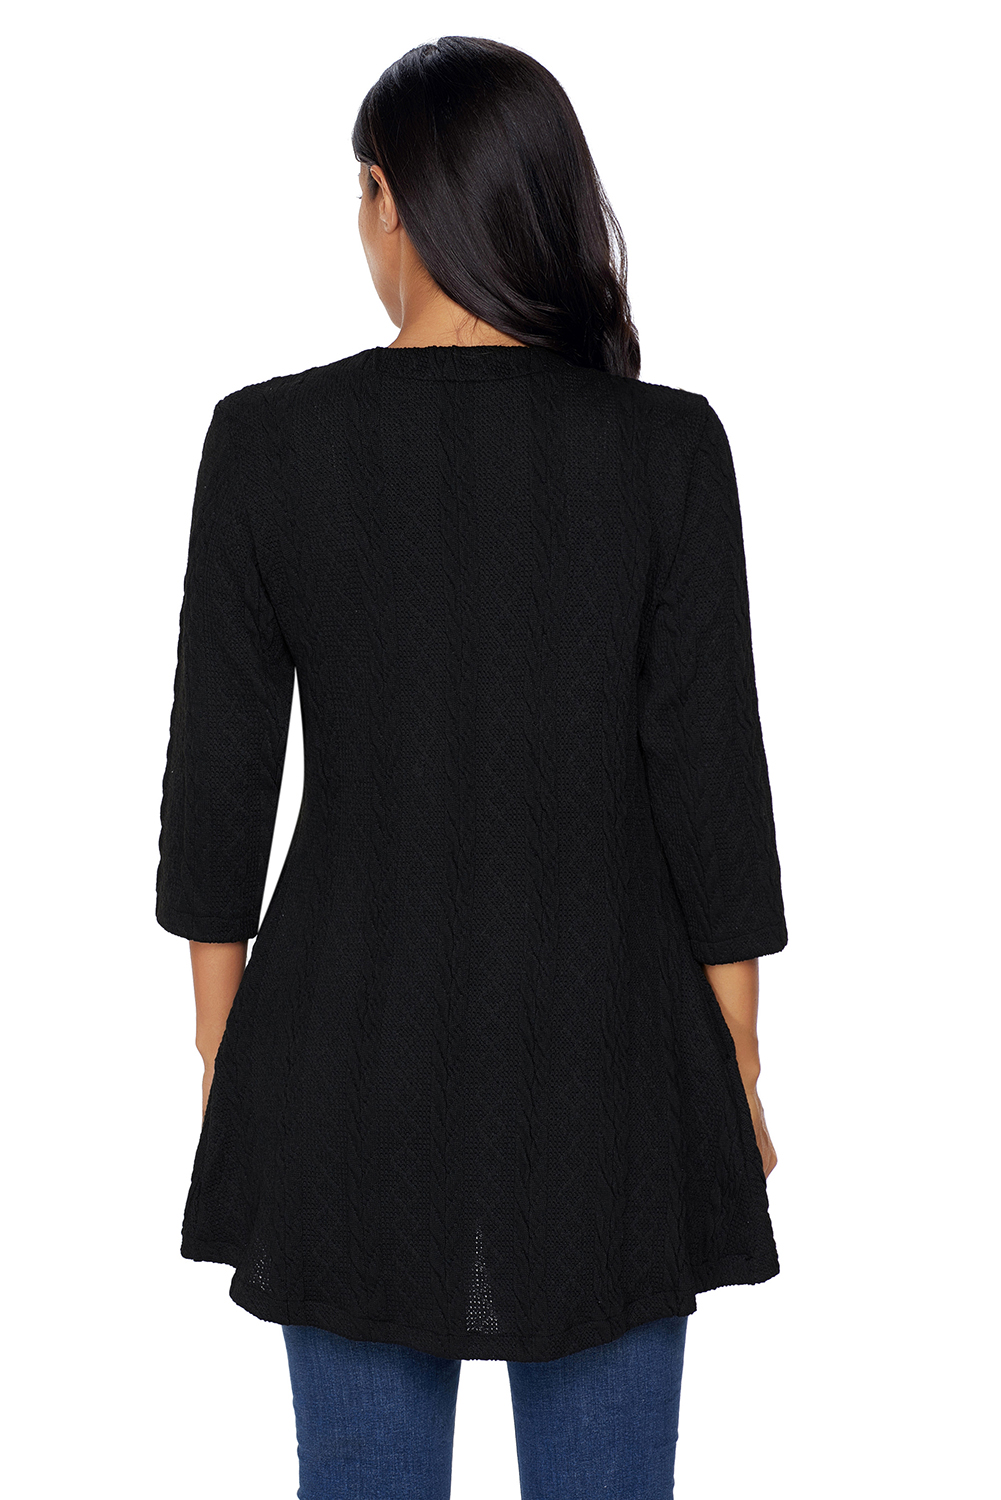 BY27750-2 Black Cable Knit Button Neck Swingy Tunic